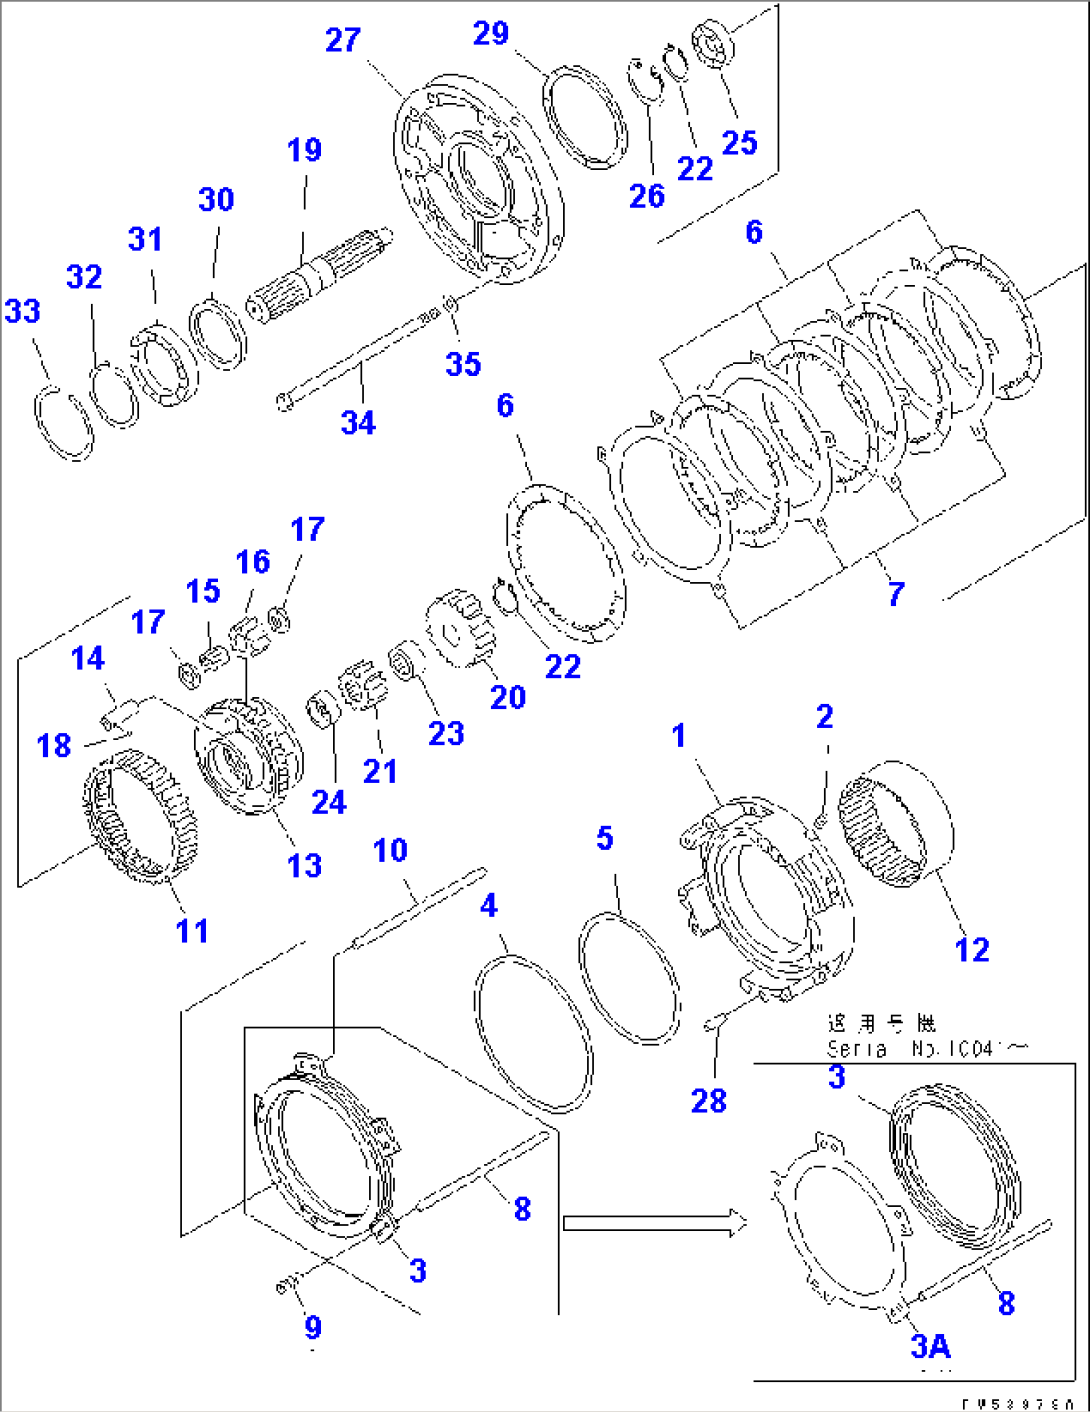 TRANSMISSION (INPUT SHAFT AND REVERSE CLUTCH)(#10001-.)